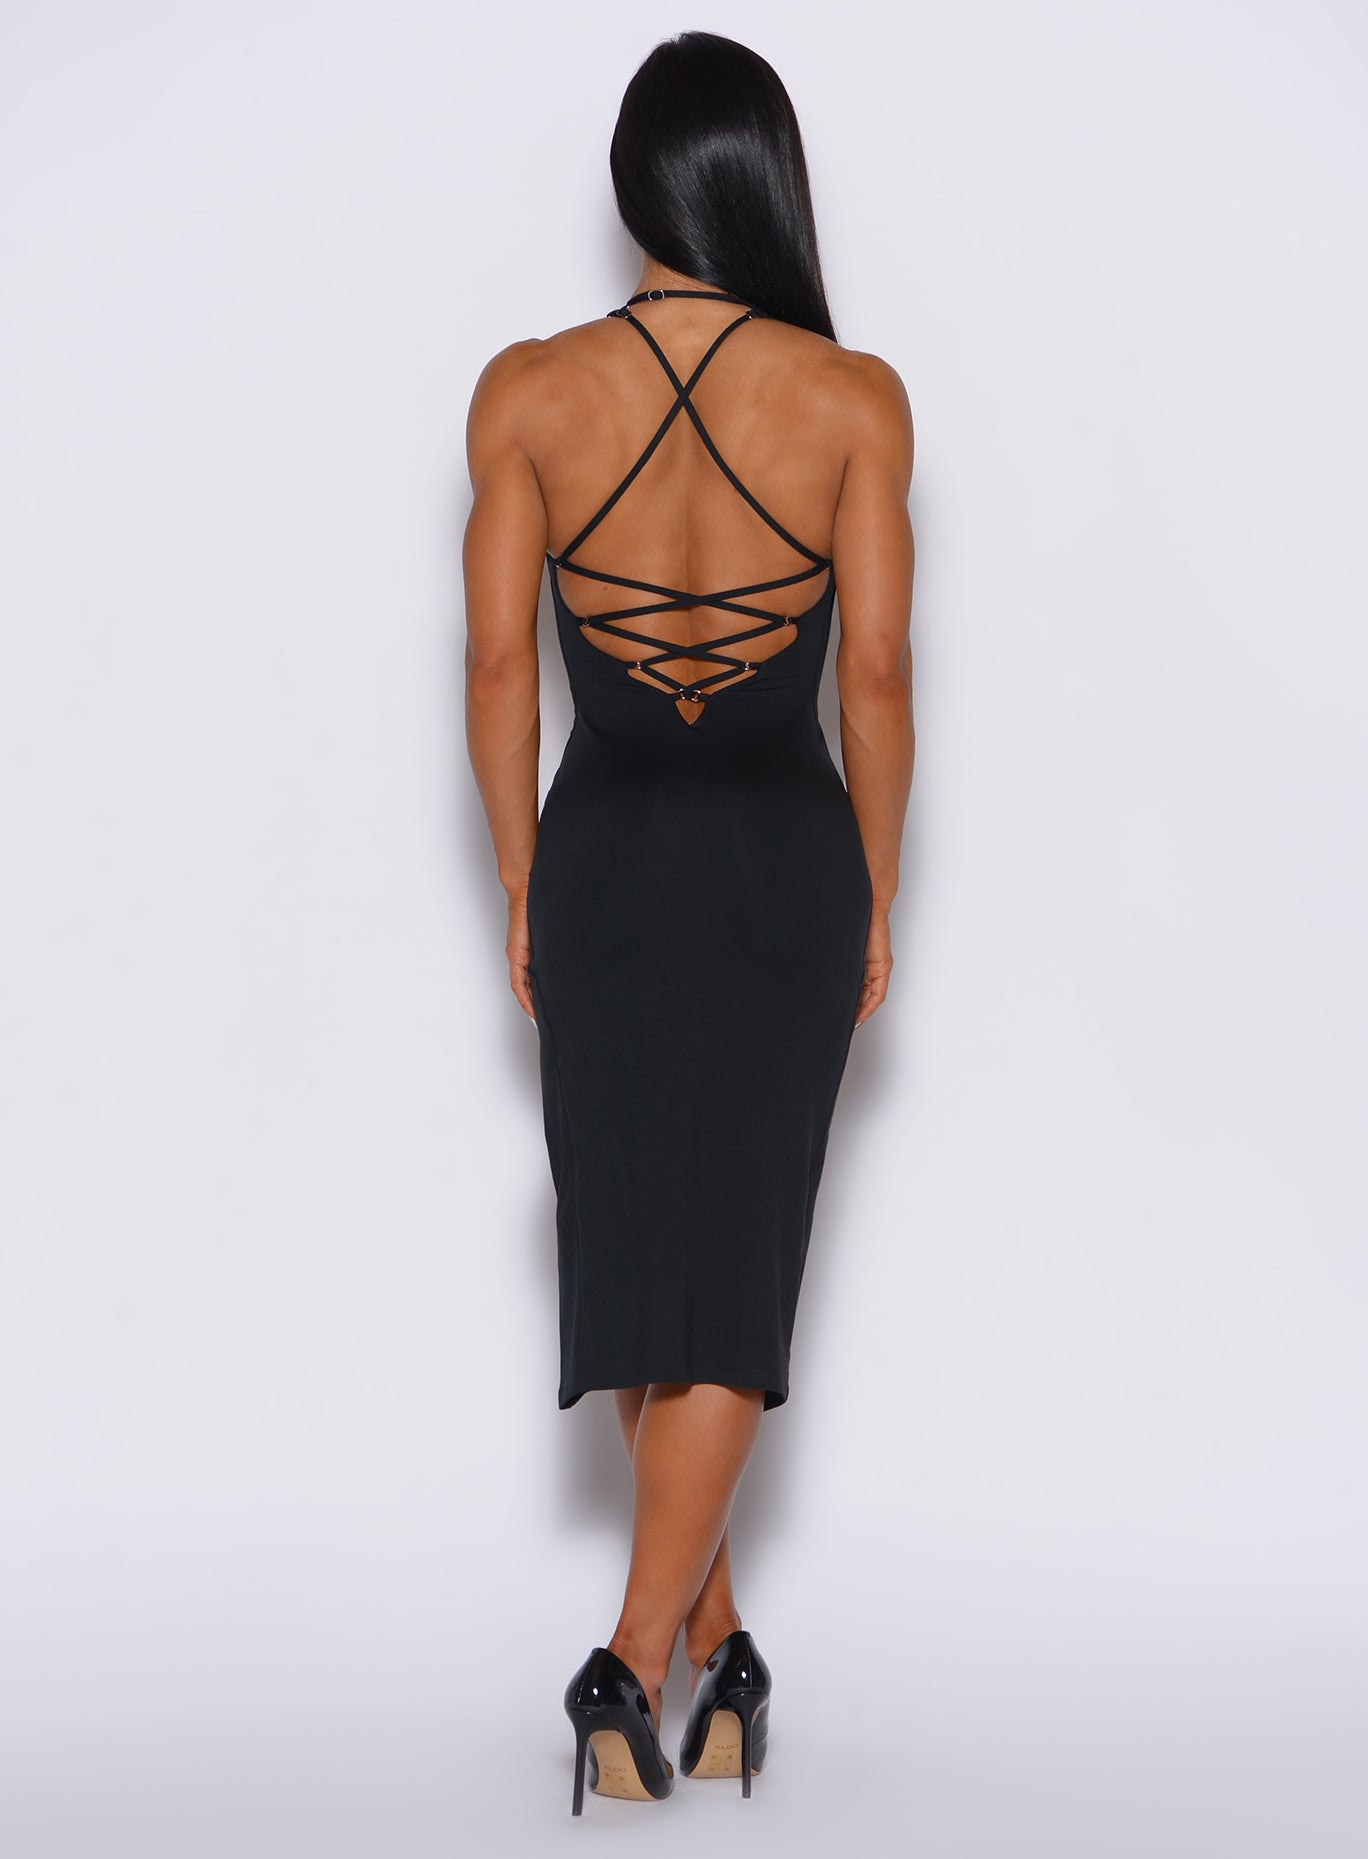 Back profile view of a model wearing our black dress featuring a crisscross design at the back